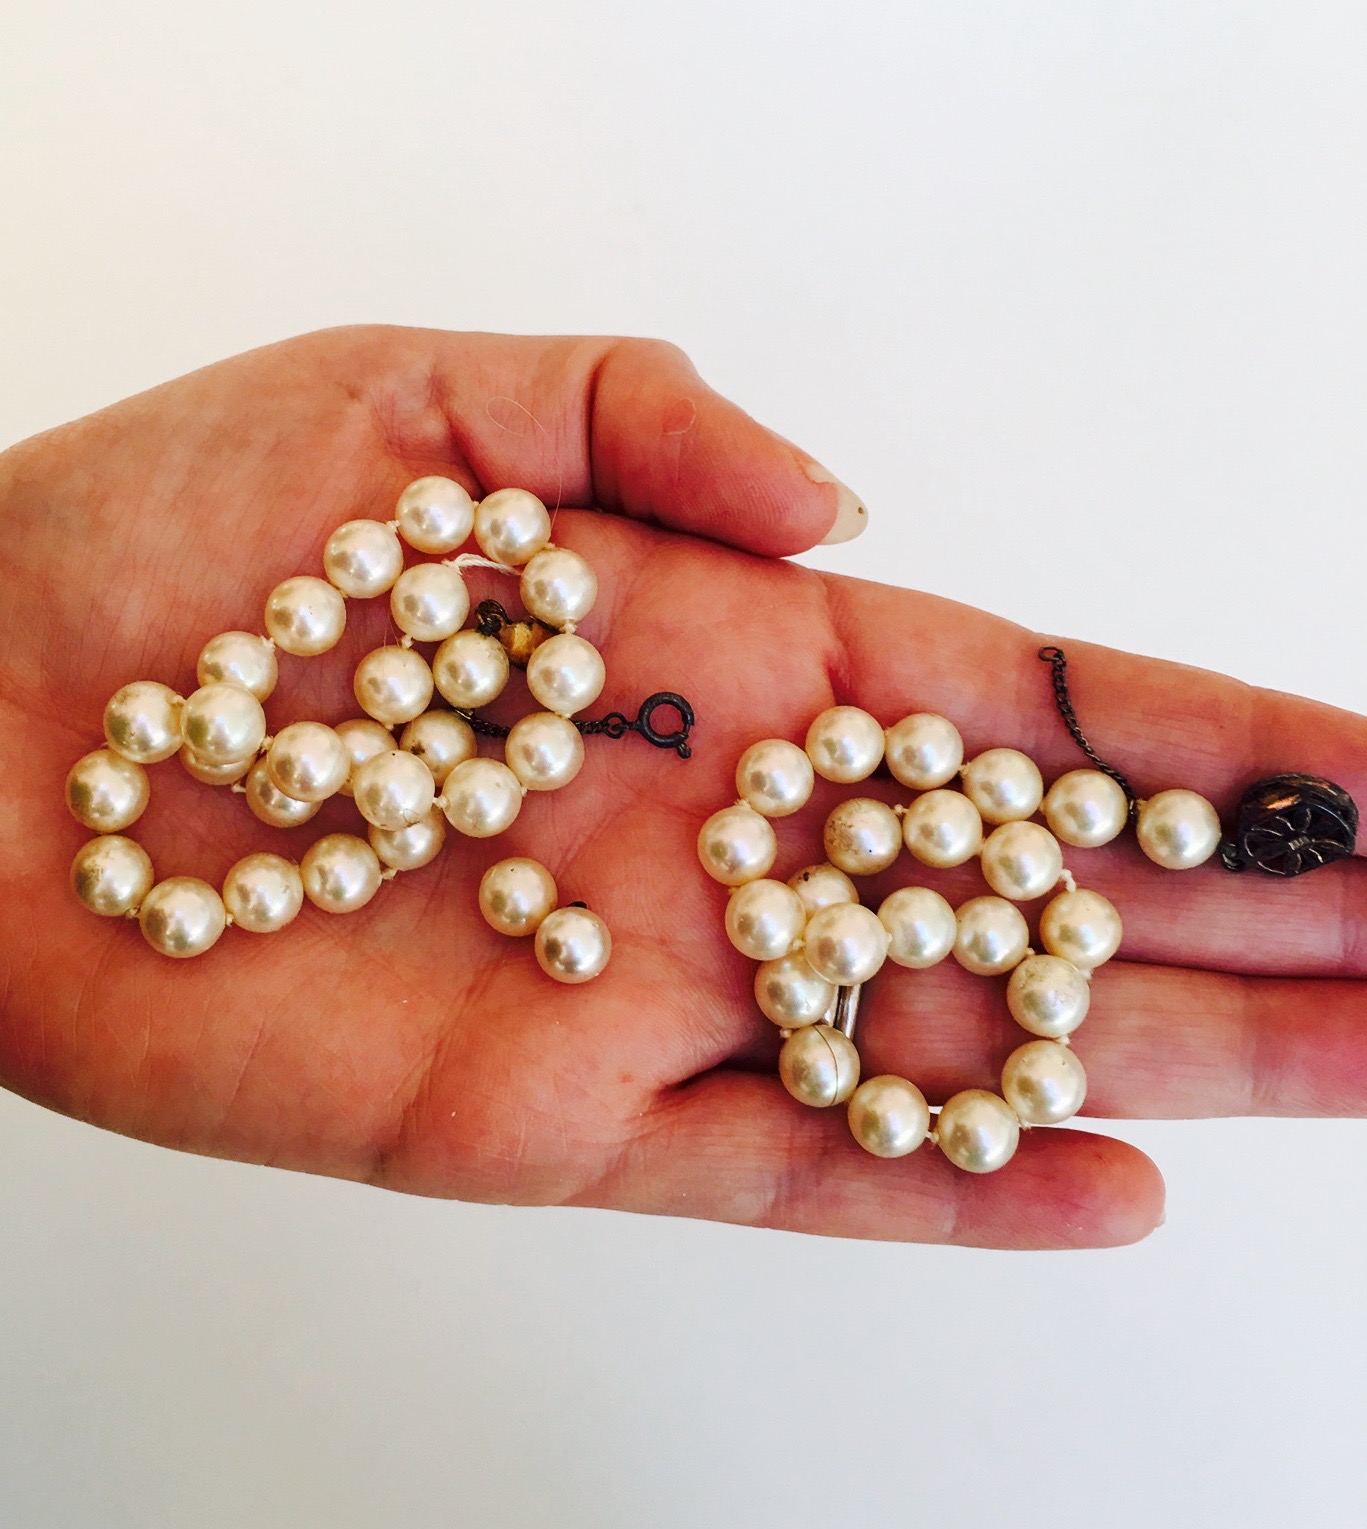 How to wear pearls after 40